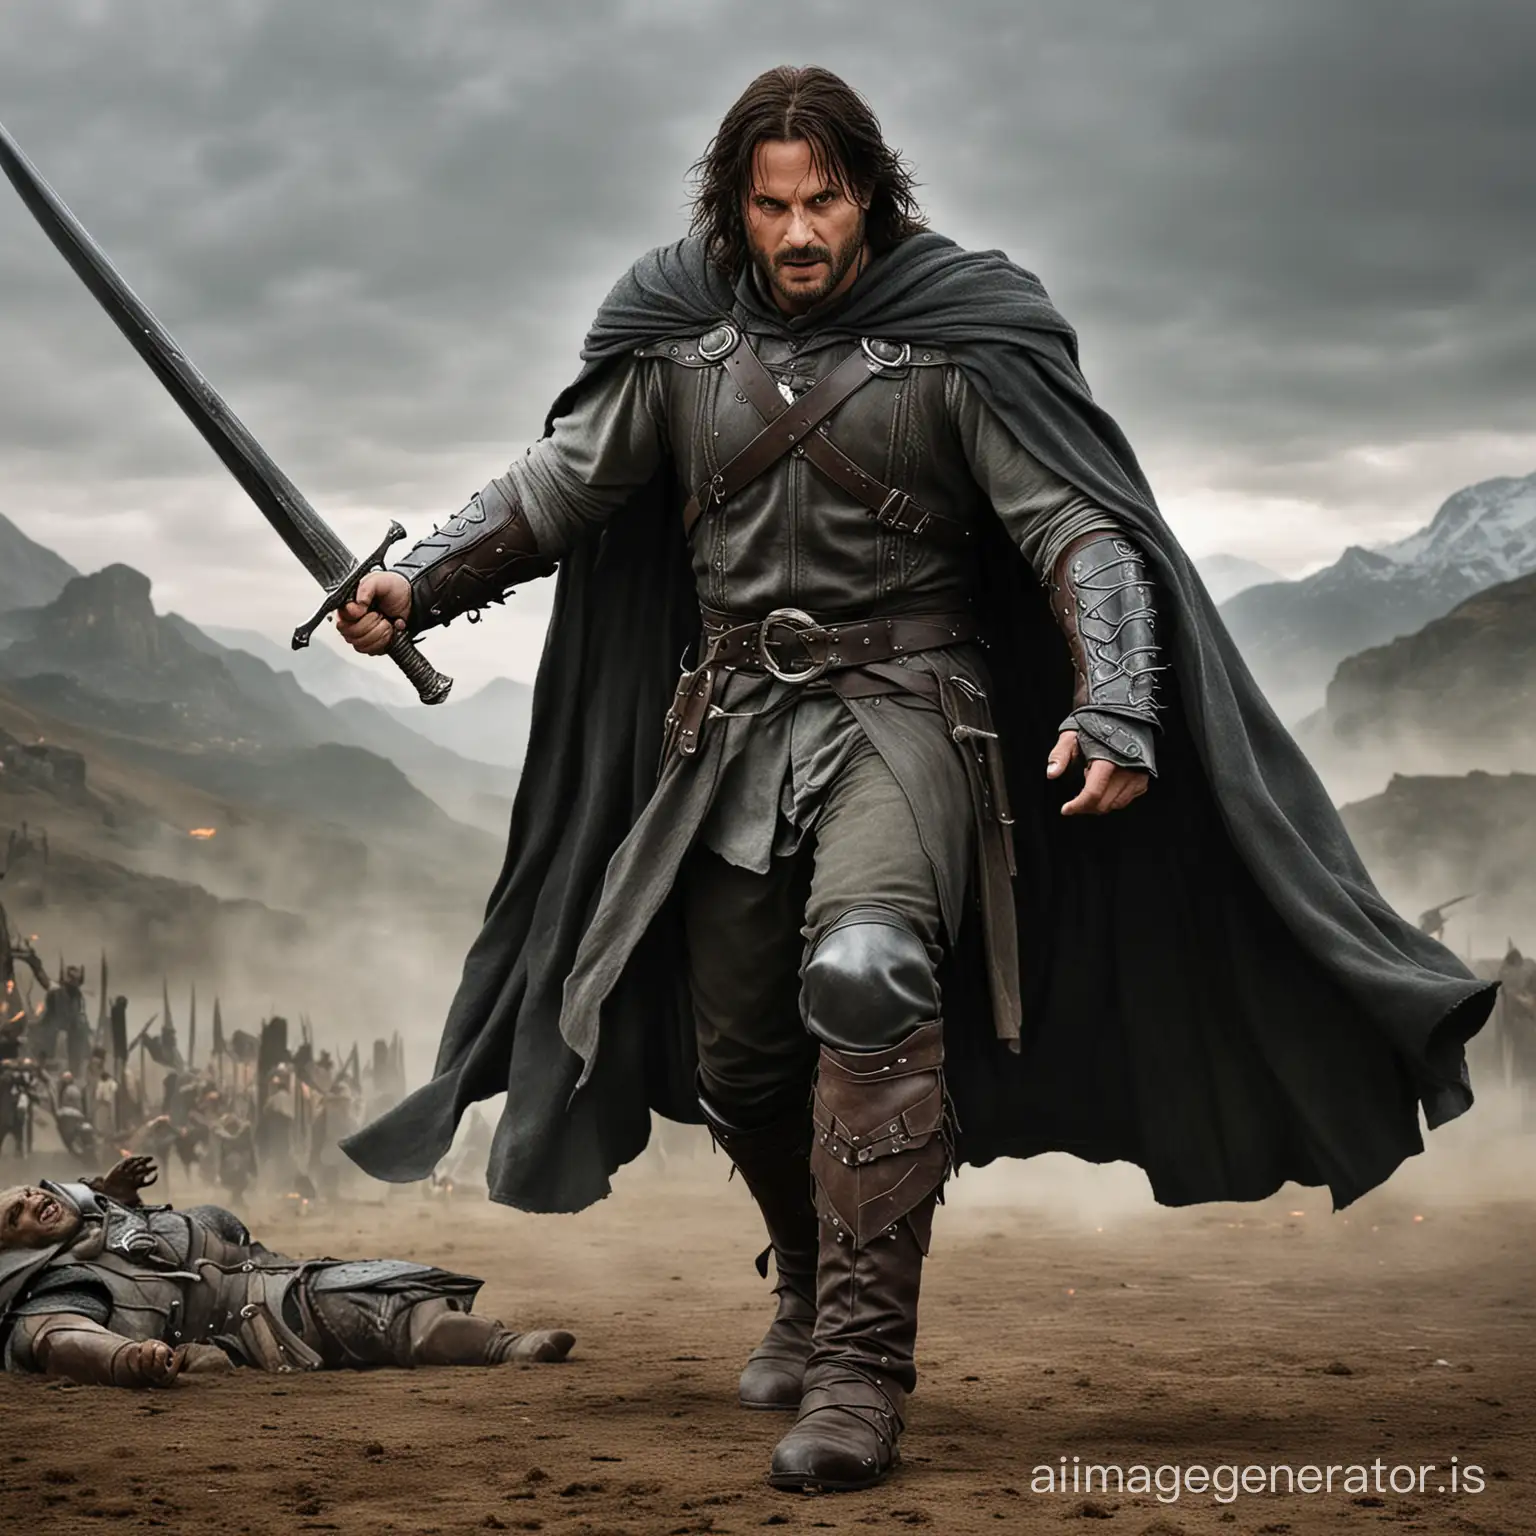 Aragorn from lord of the rings fighting with a big orc like monster. Aragorn wears a grey cape and leather boots.